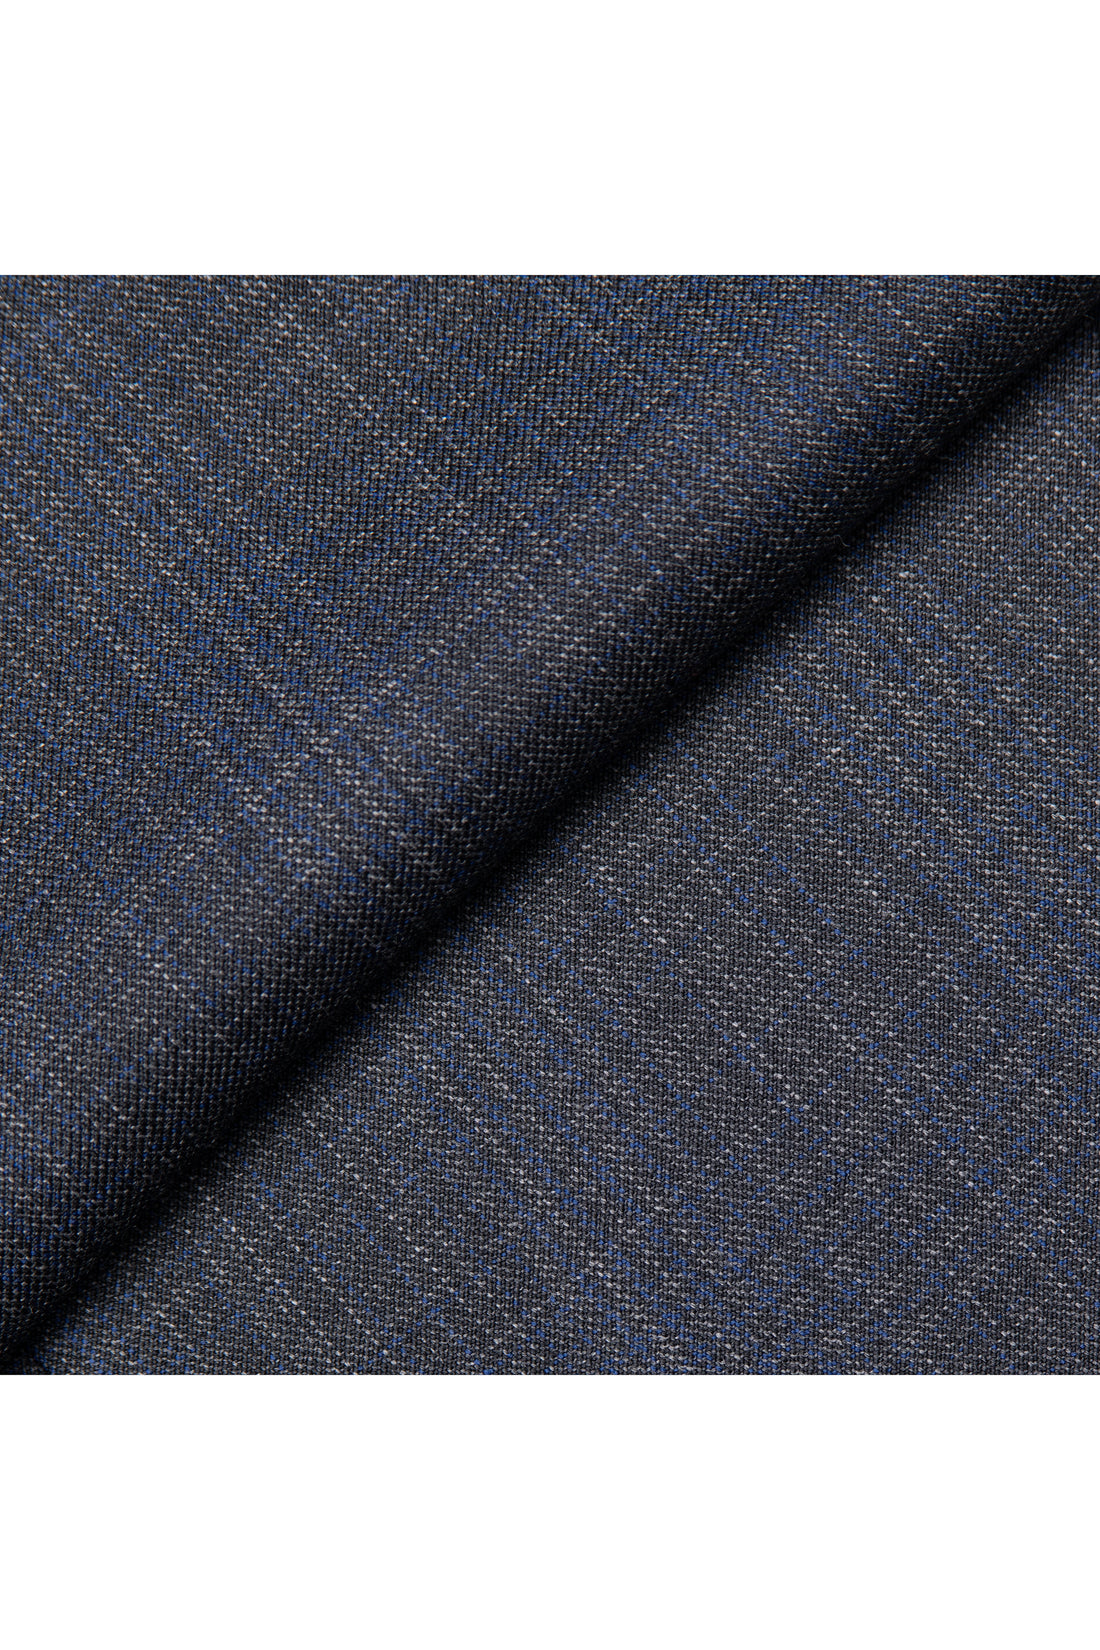 Charcoal-Blue Graph Check Suit swatch fabric